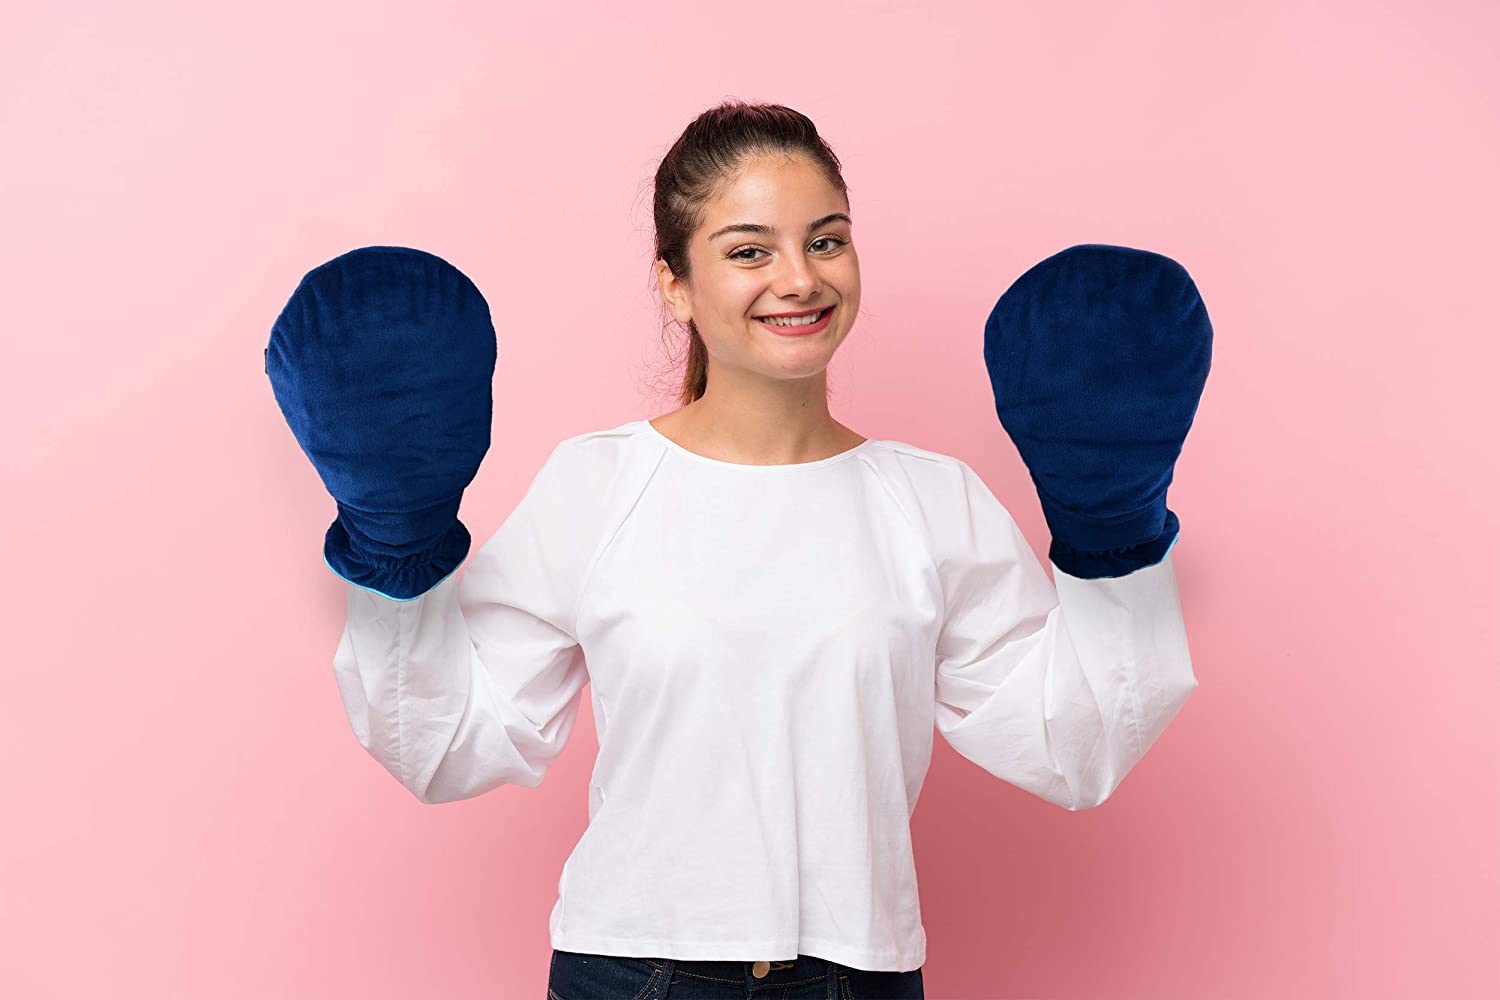 Heated Therapy Mittens (Blue)